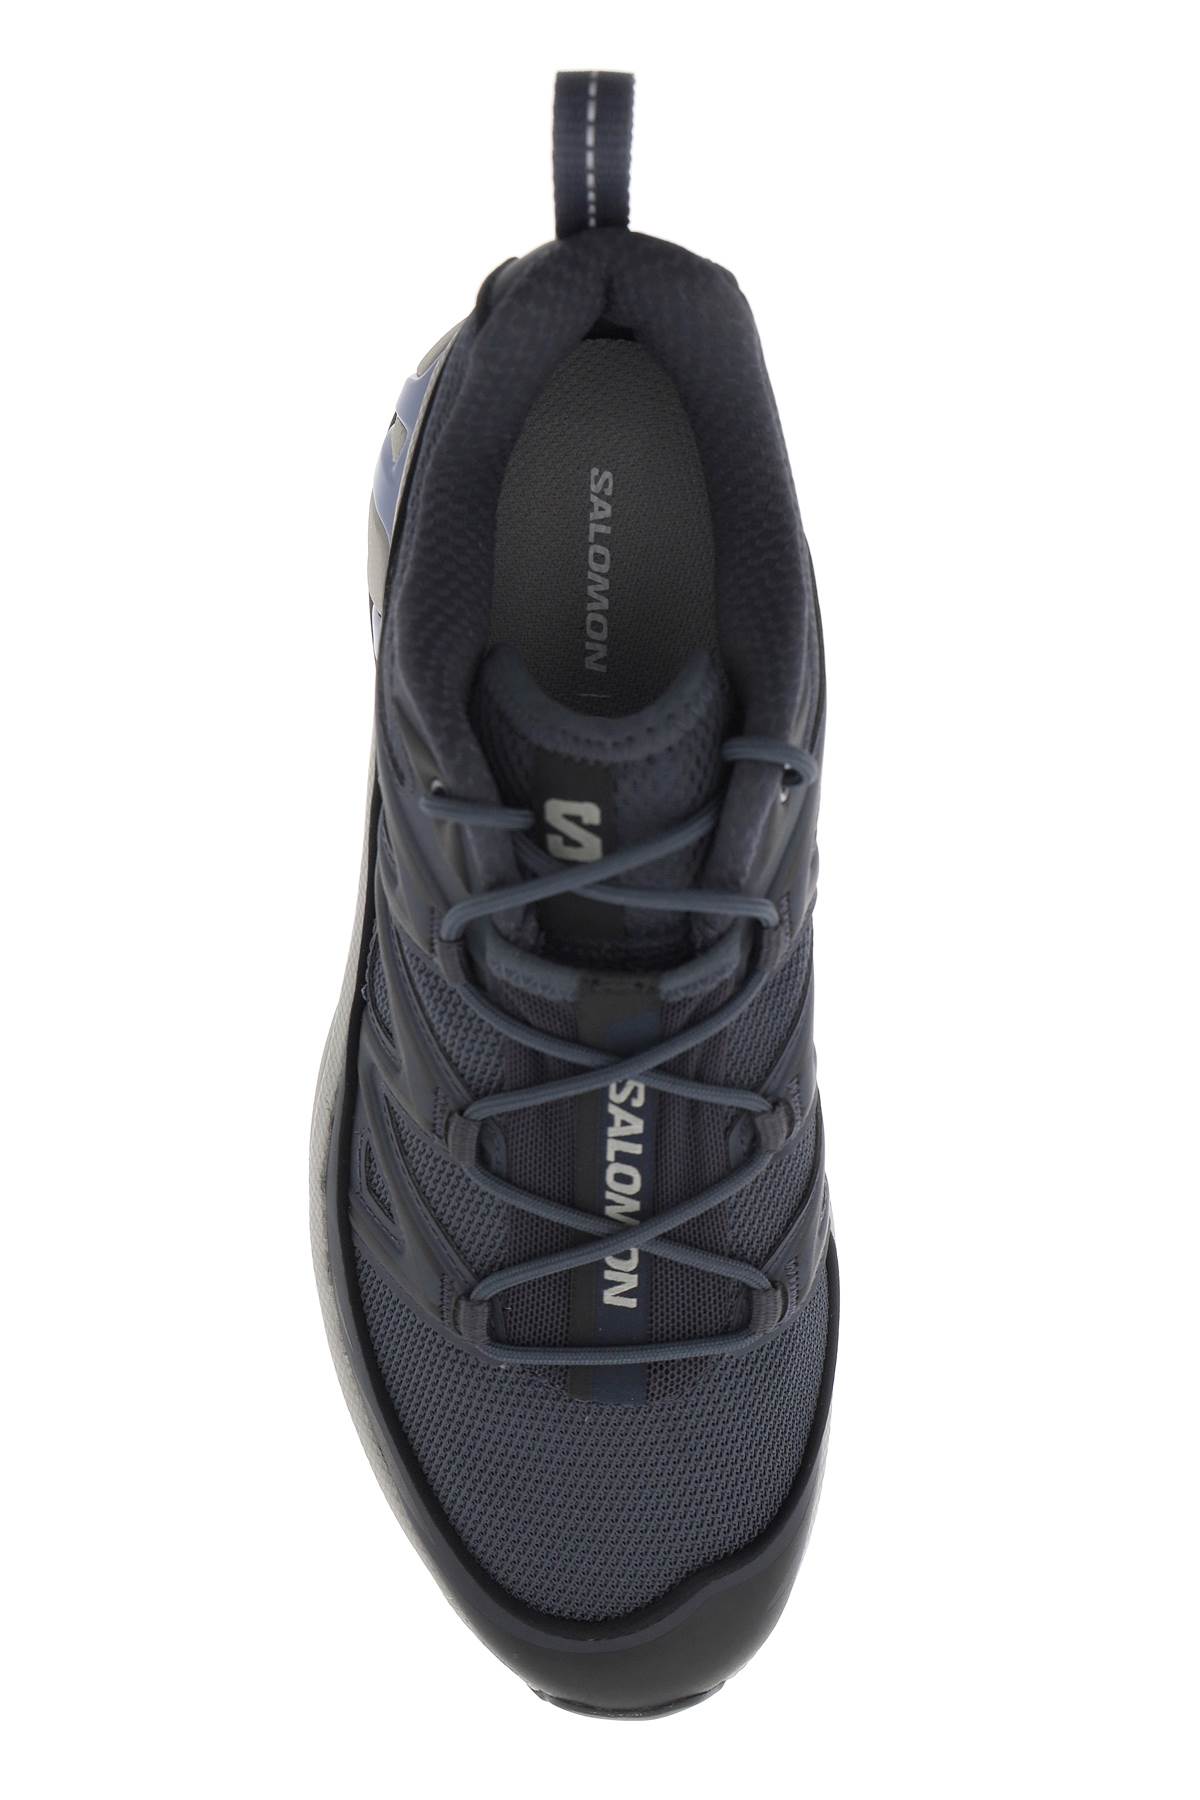 Shop Salomon Xt-6 Expanse Sneakers In India Ink Ghost Gray Stonewash (blue)